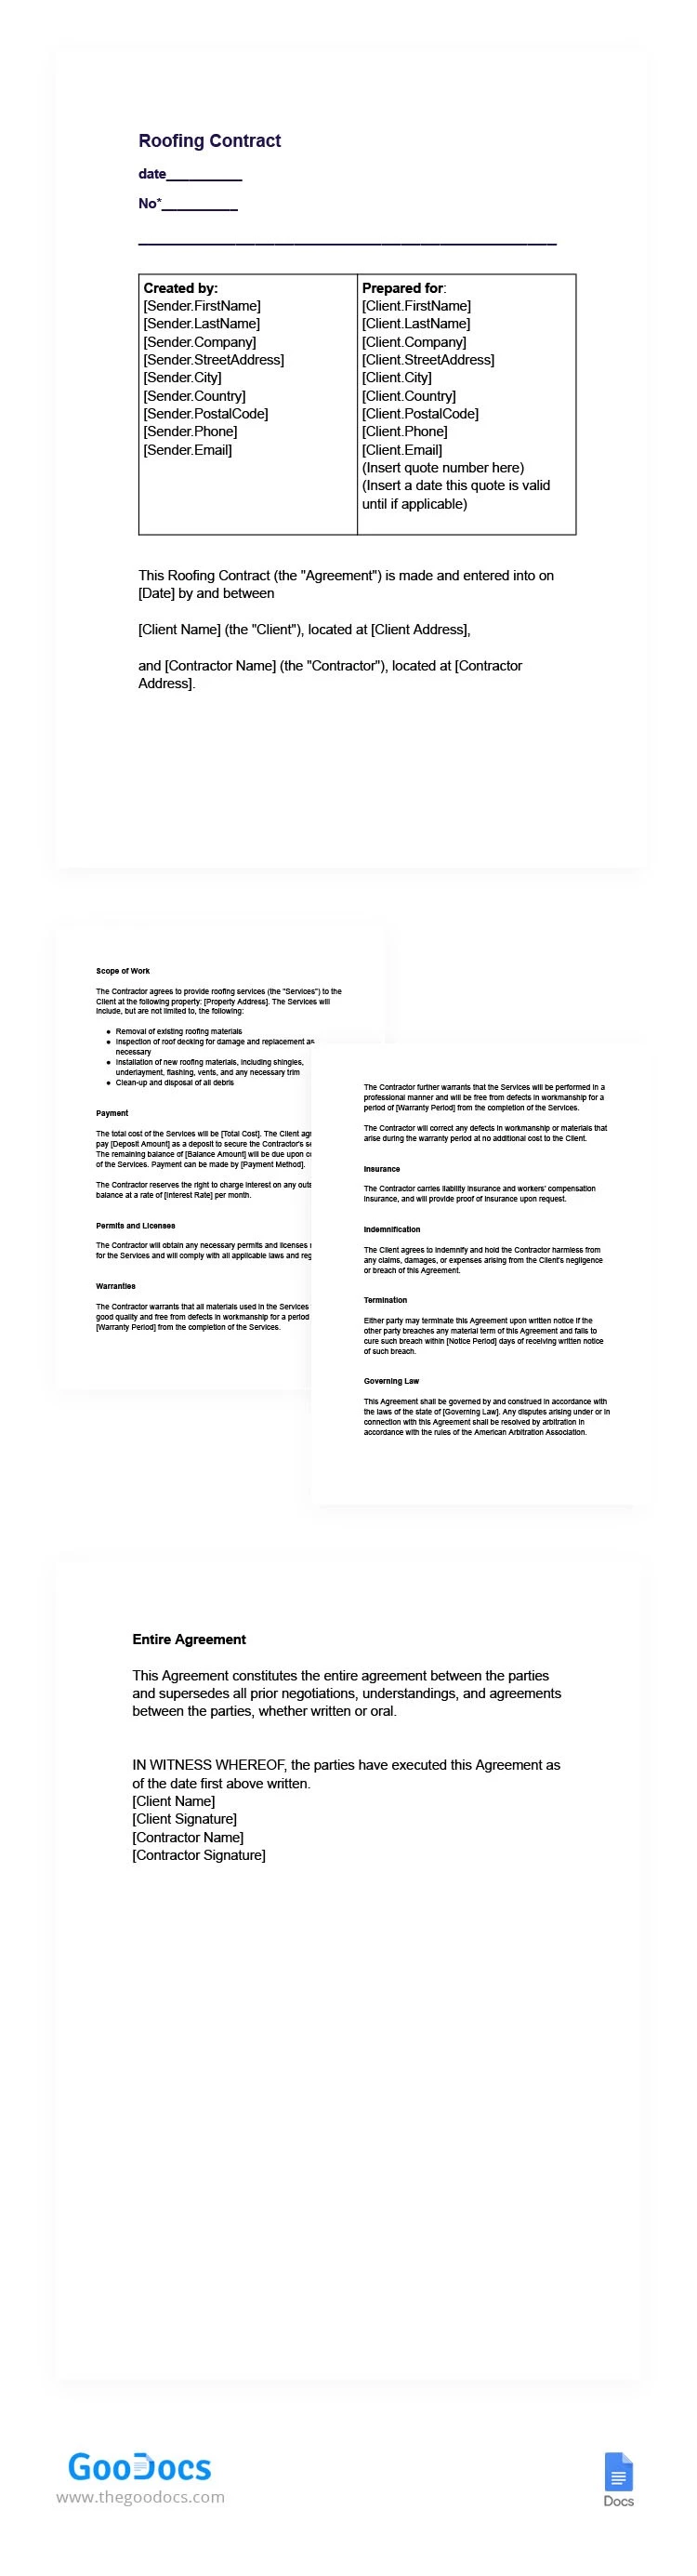 Roofing Contract - free Google Docs Template - 10065726